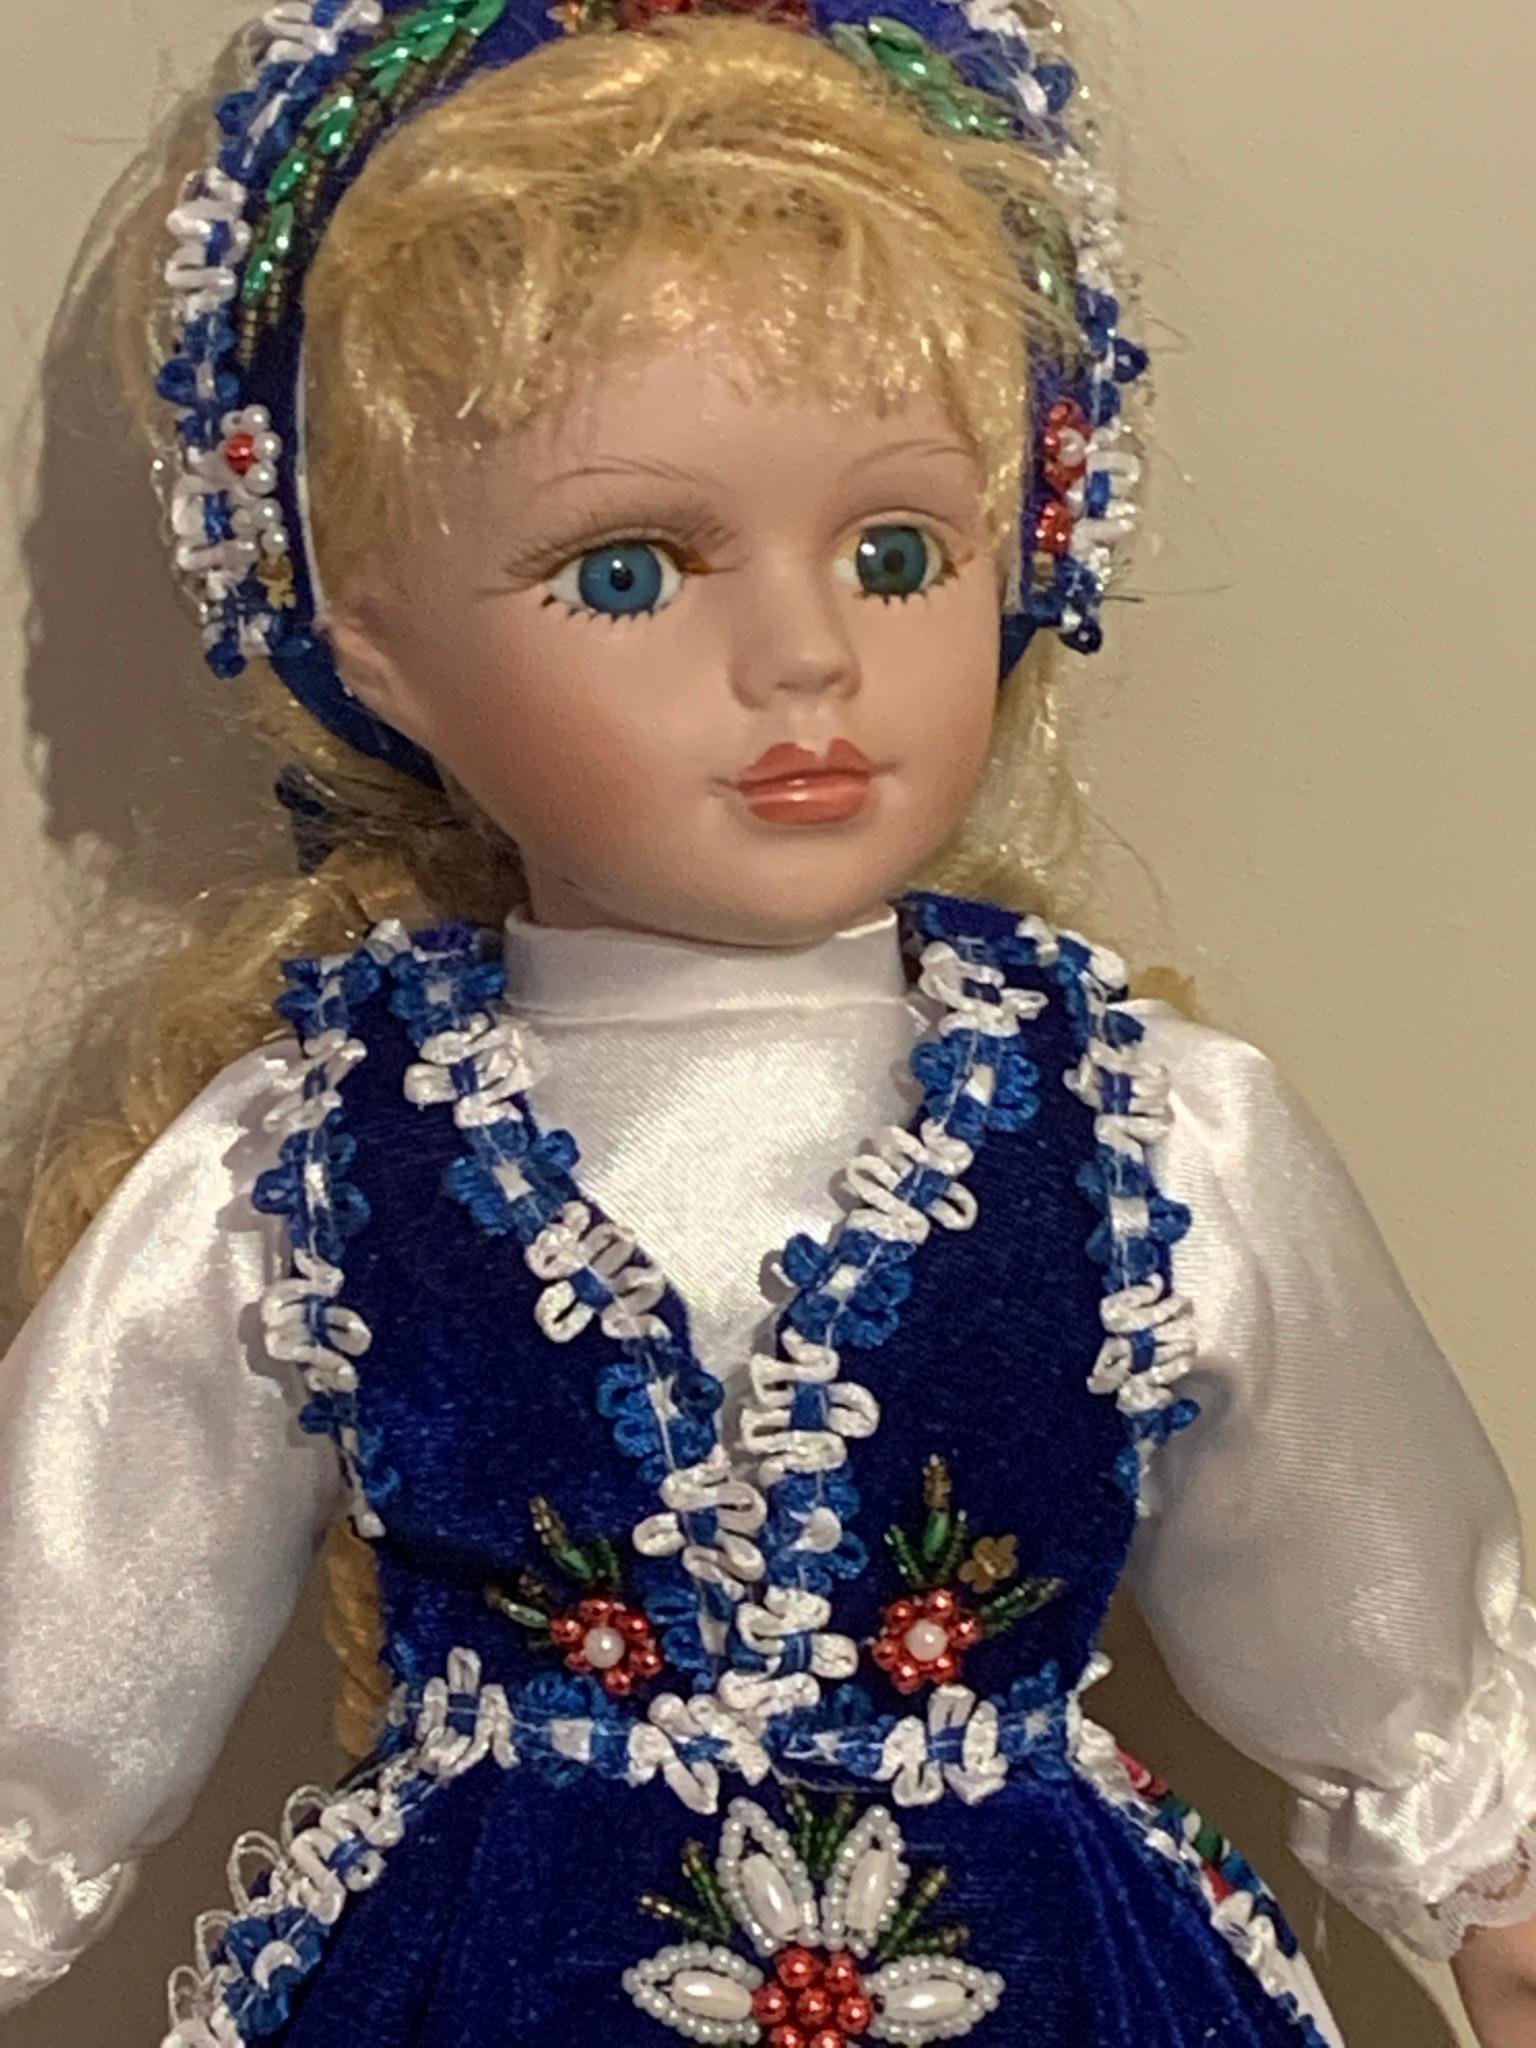 6 Beautifully Made Dolls - One doll is from the Cathy Collection